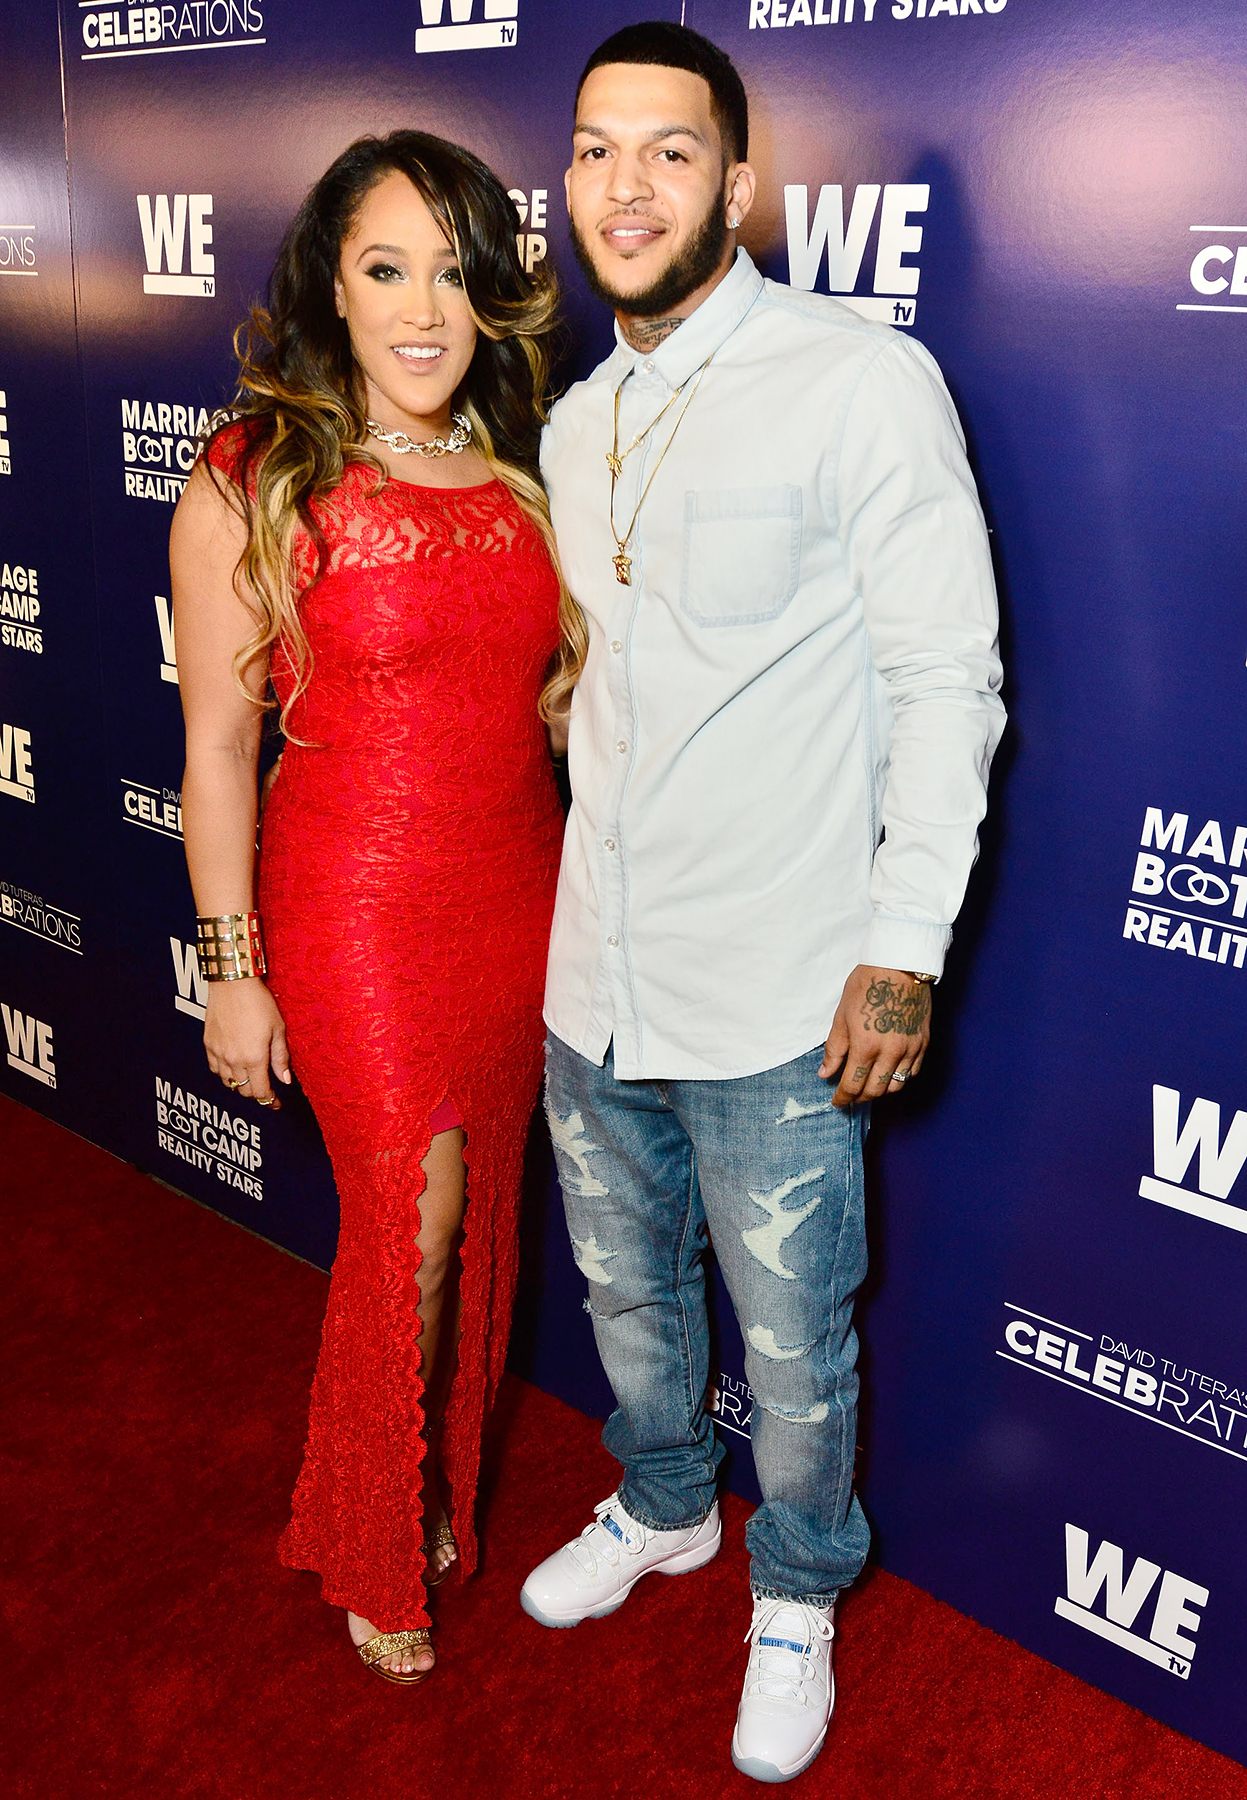 Bad Girls Club's Natalie Nunn Is Pregnant After Miscarriage